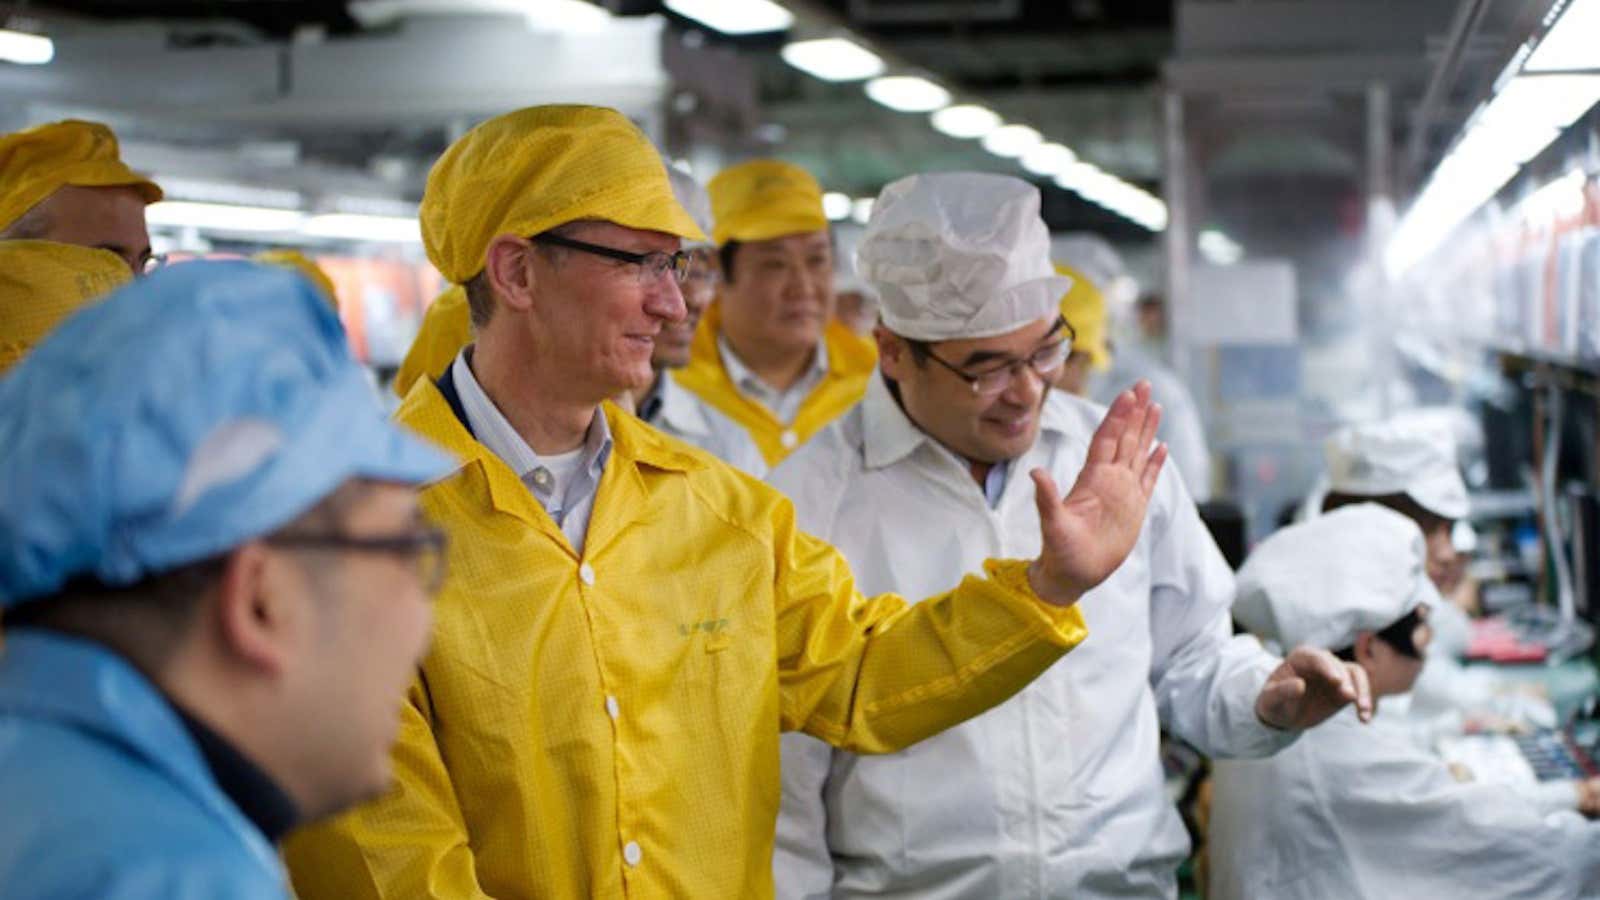 Apple CEO Tim Cook visits a factory in Asia. And yet his lawyer misses made-in-the-USA televisions?